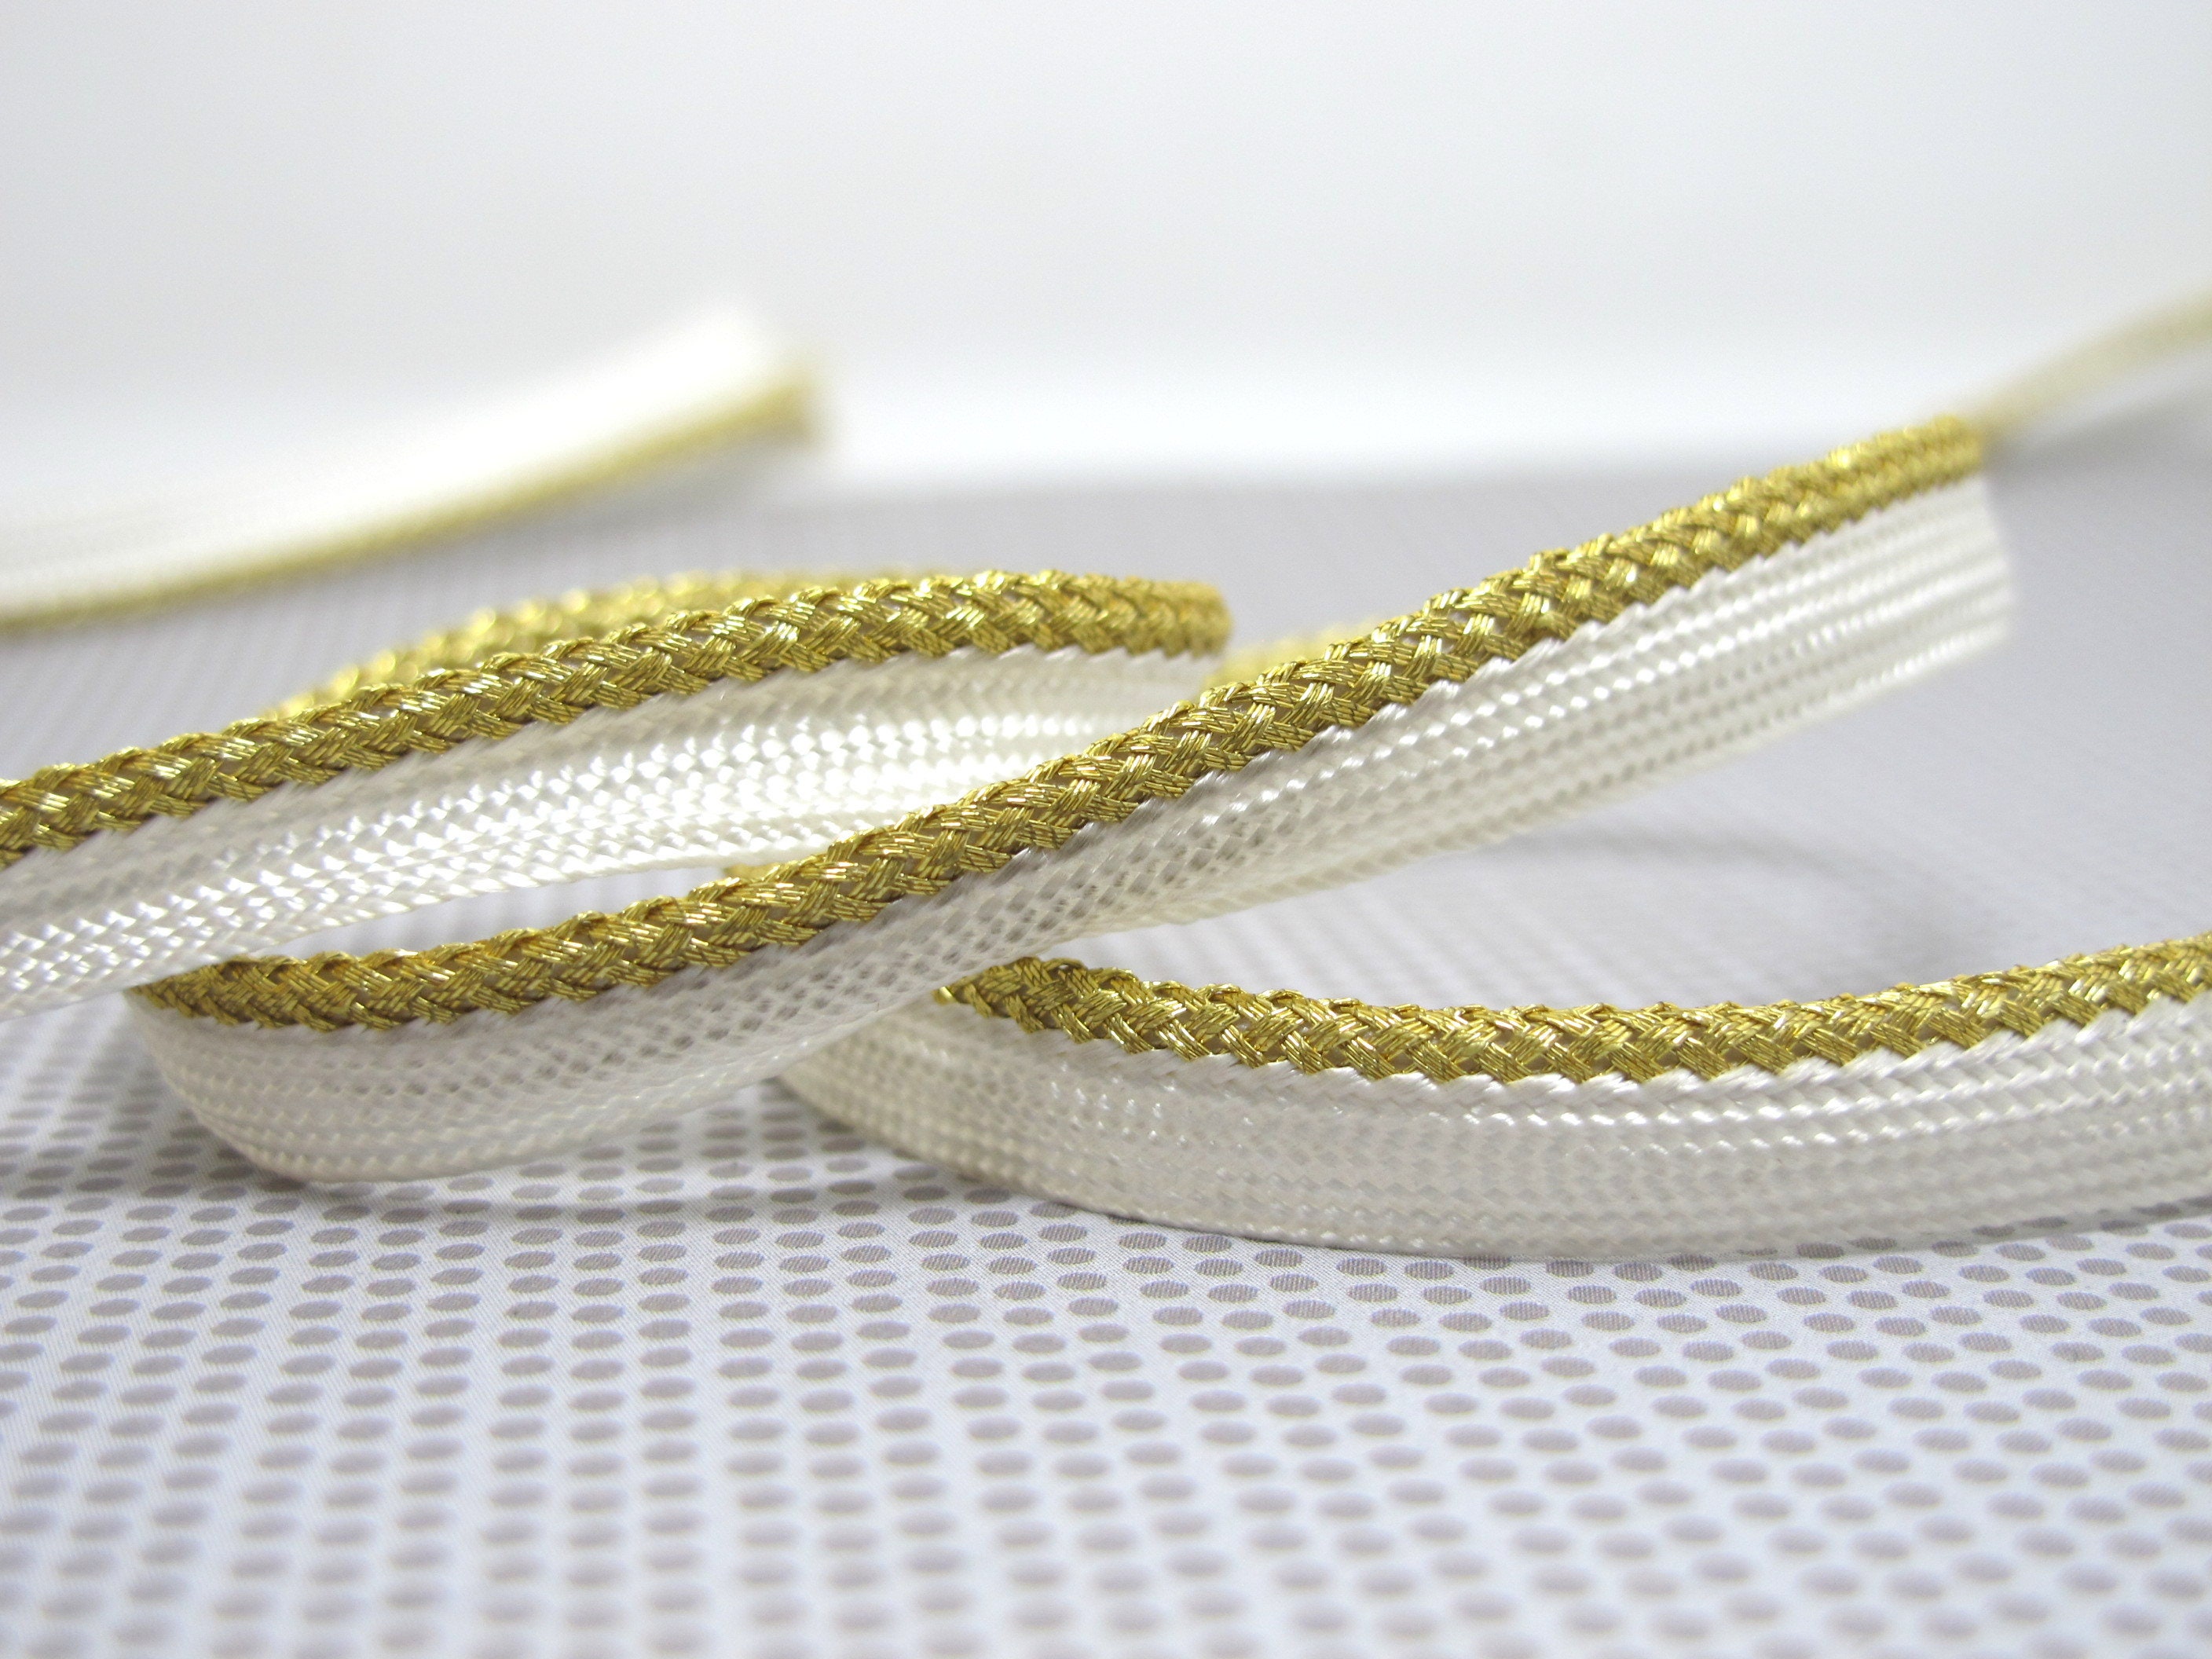  Mandala Crafts Twisted Lip Cord Trim by The Yard - Gold Lip  Cording for Sewing Pillows Upholstery Trim Edge Sewing Piping Cord